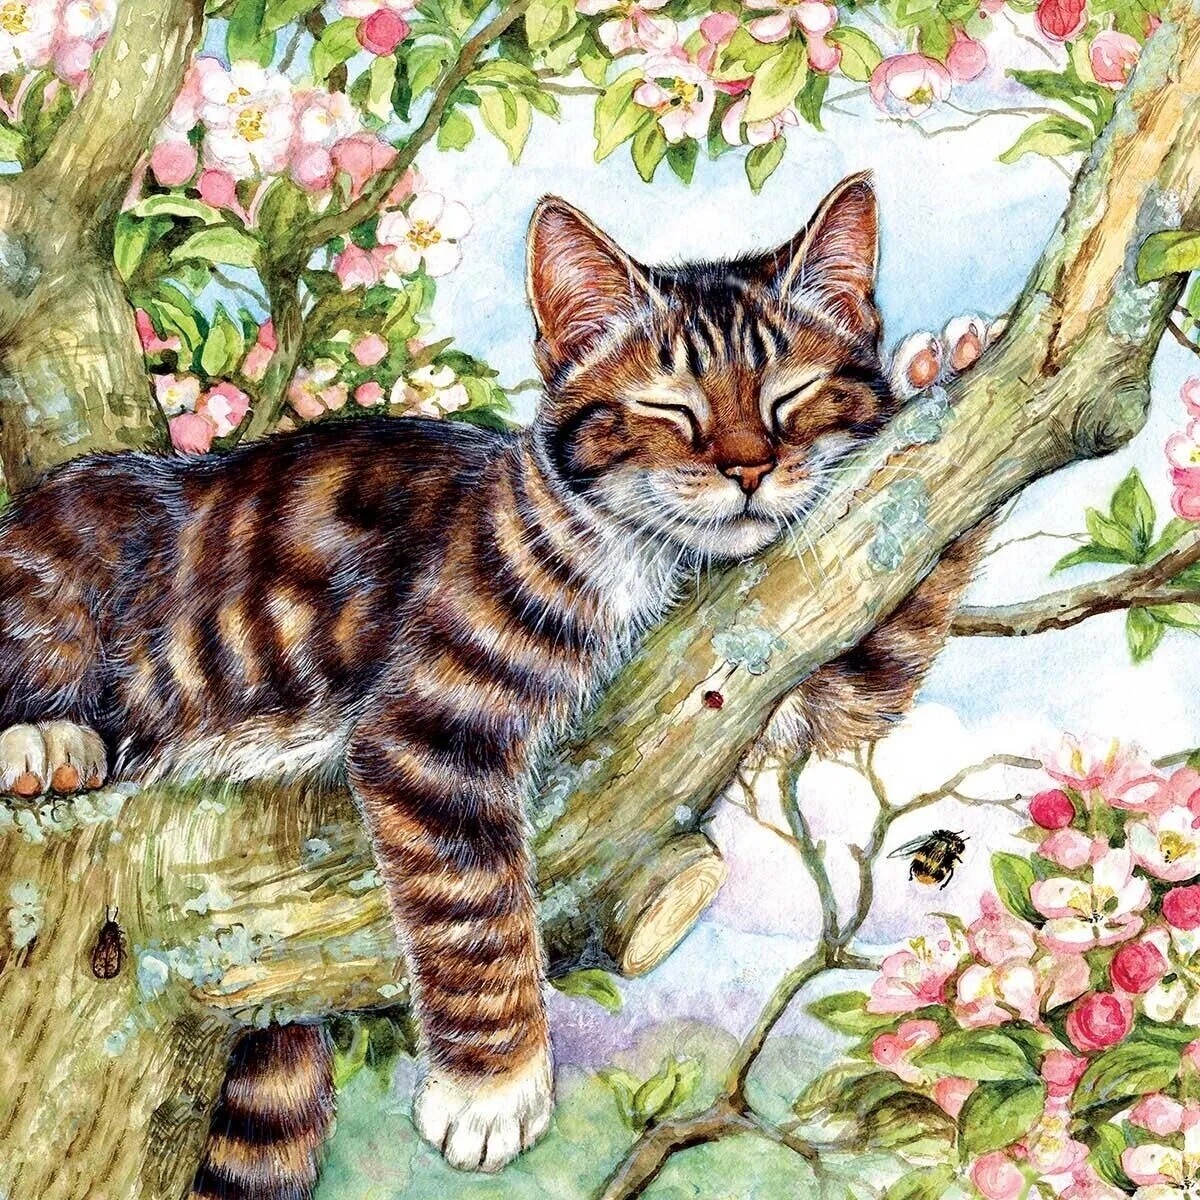 Cat Sleeping - Full Drill Diamond Painting - Specially ordered for you. Delivery is approximately 4 - 6 weeks.